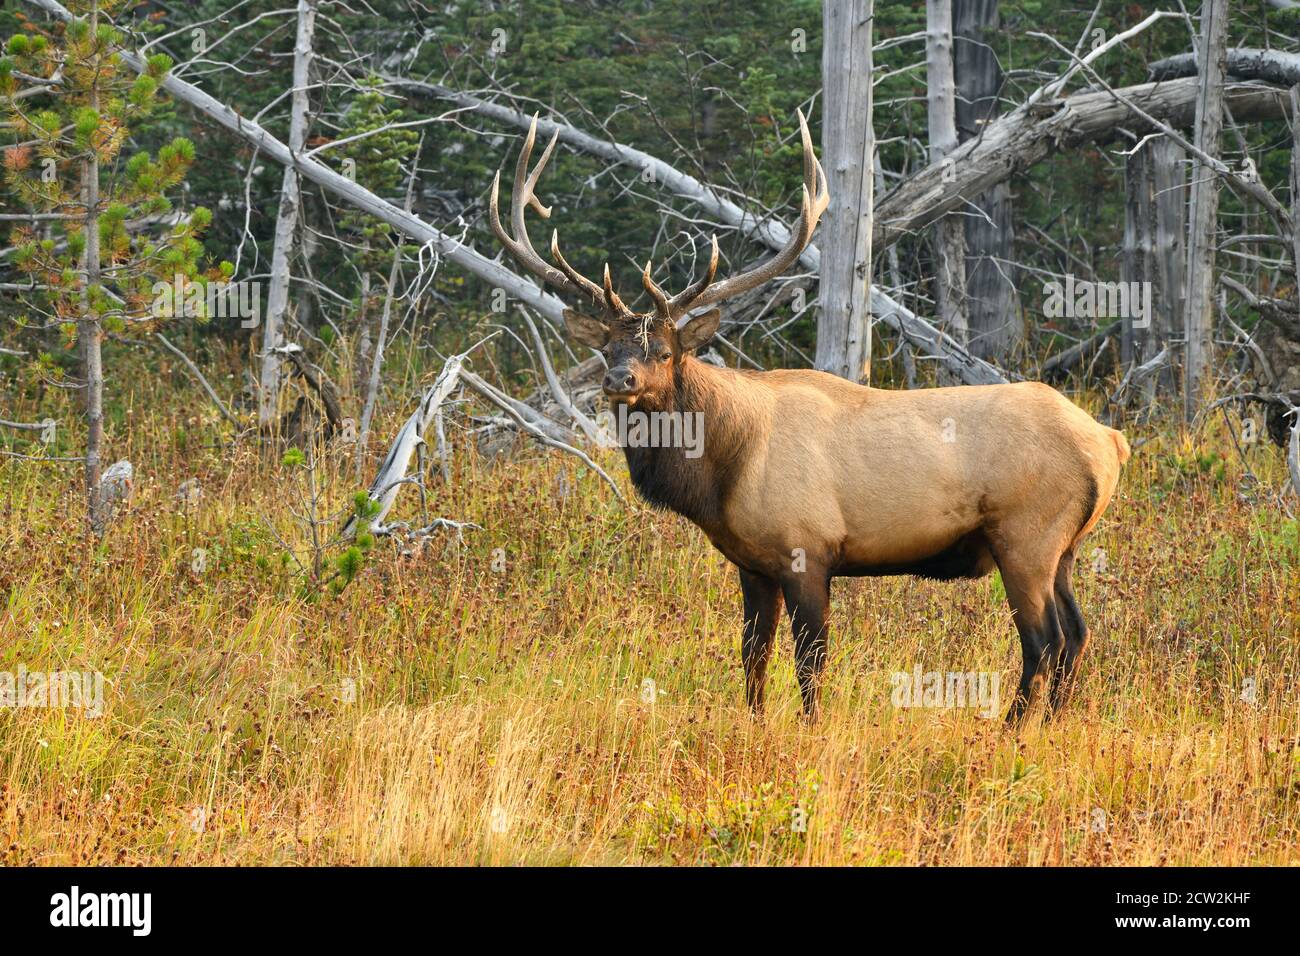 A wild bull elk 'Cervus elaphus', standing at the edge of a wooded area in rural Alberta Canada. Stock Photo